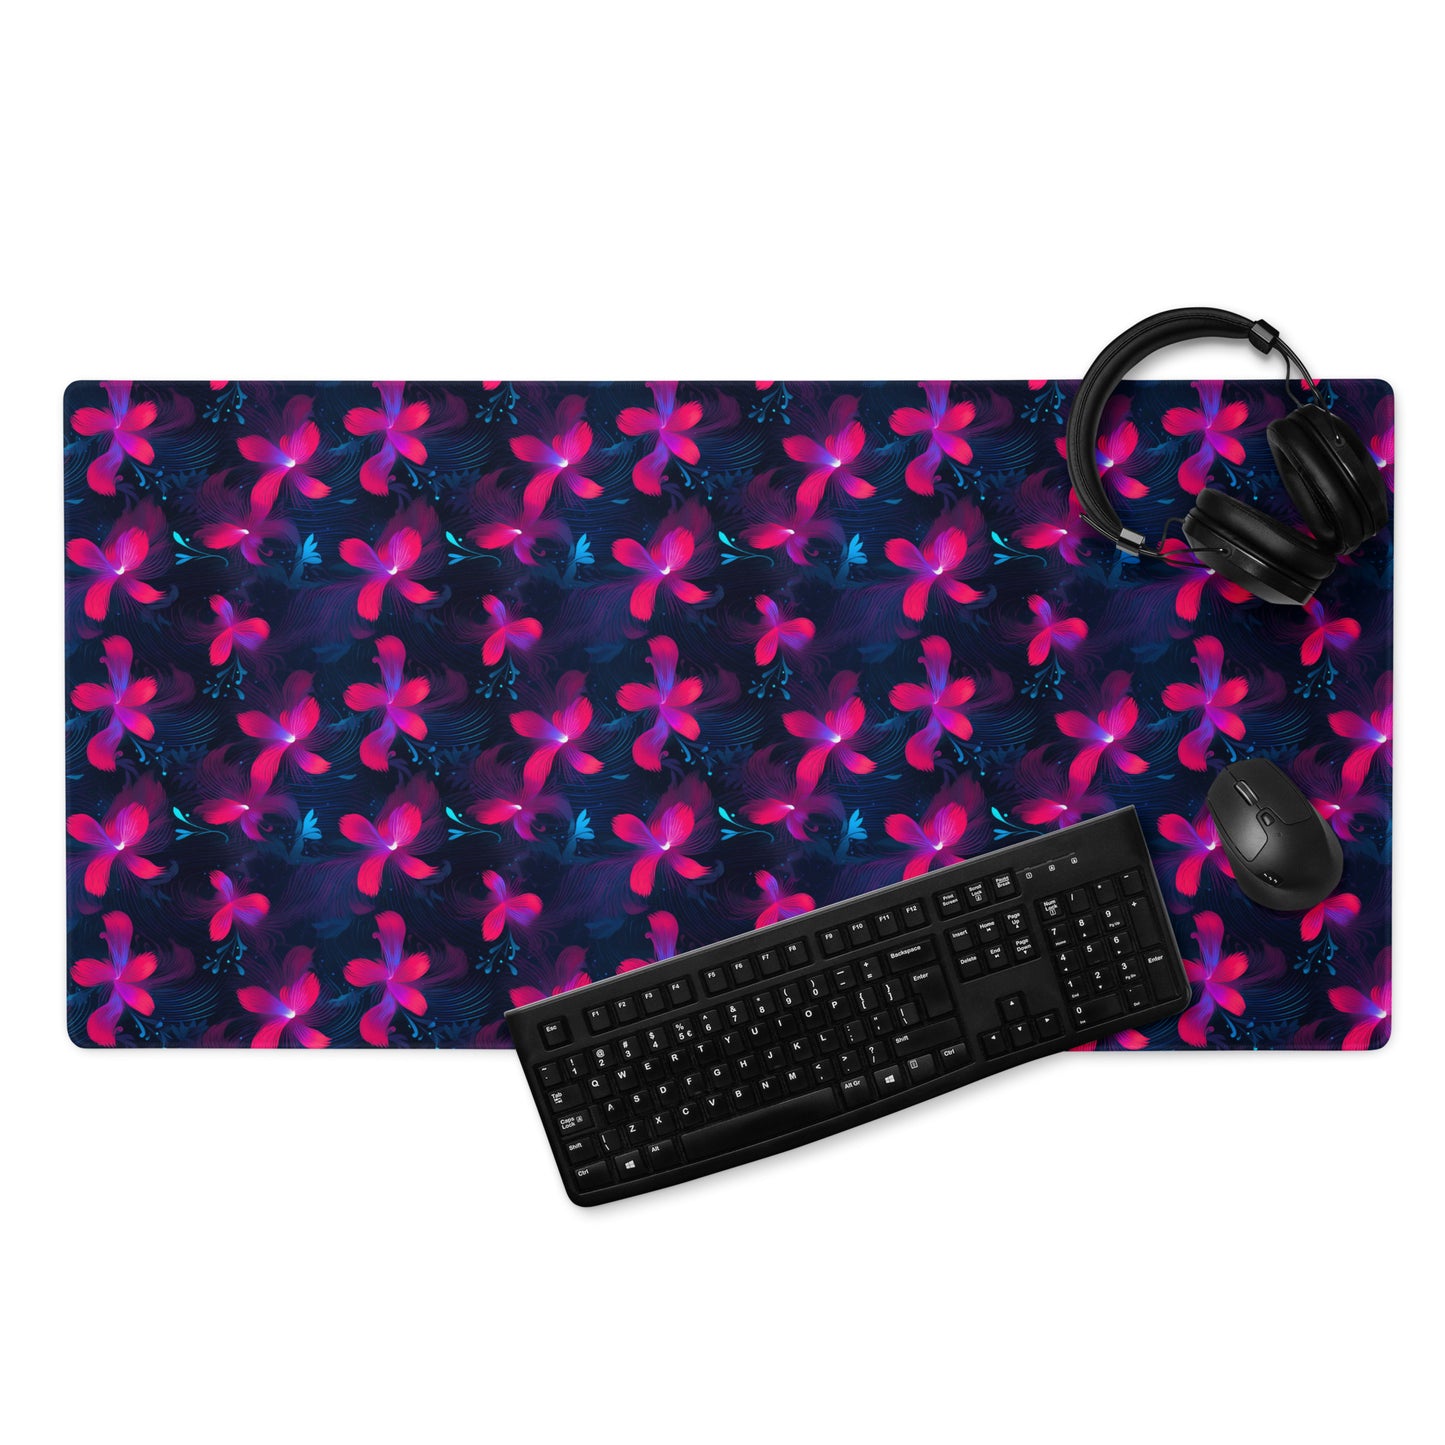 A 36" x 18" desk pad with neon pink and blue floral pattern. With a keyboard, mouse, and headphones sitting on it.